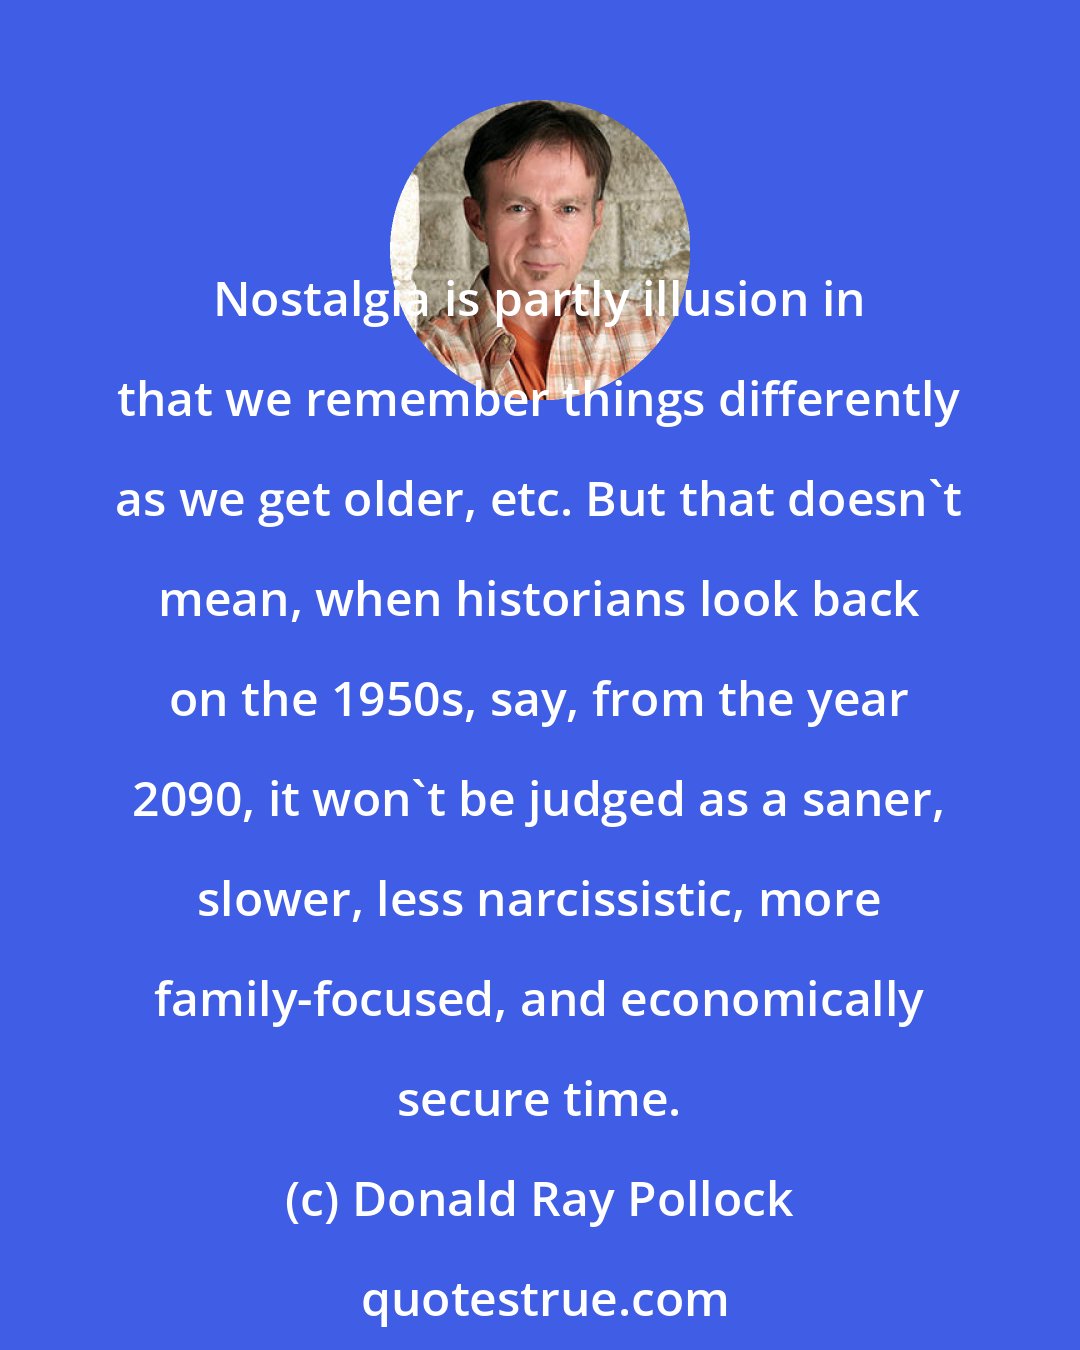 Donald Ray Pollock: Nostalgia is partly illusion in that we remember things differently as we get older, etc. But that doesn't mean, when historians look back on the 1950s, say, from the year 2090, it won't be judged as a saner, slower, less narcissistic, more family-focused, and economically secure time.